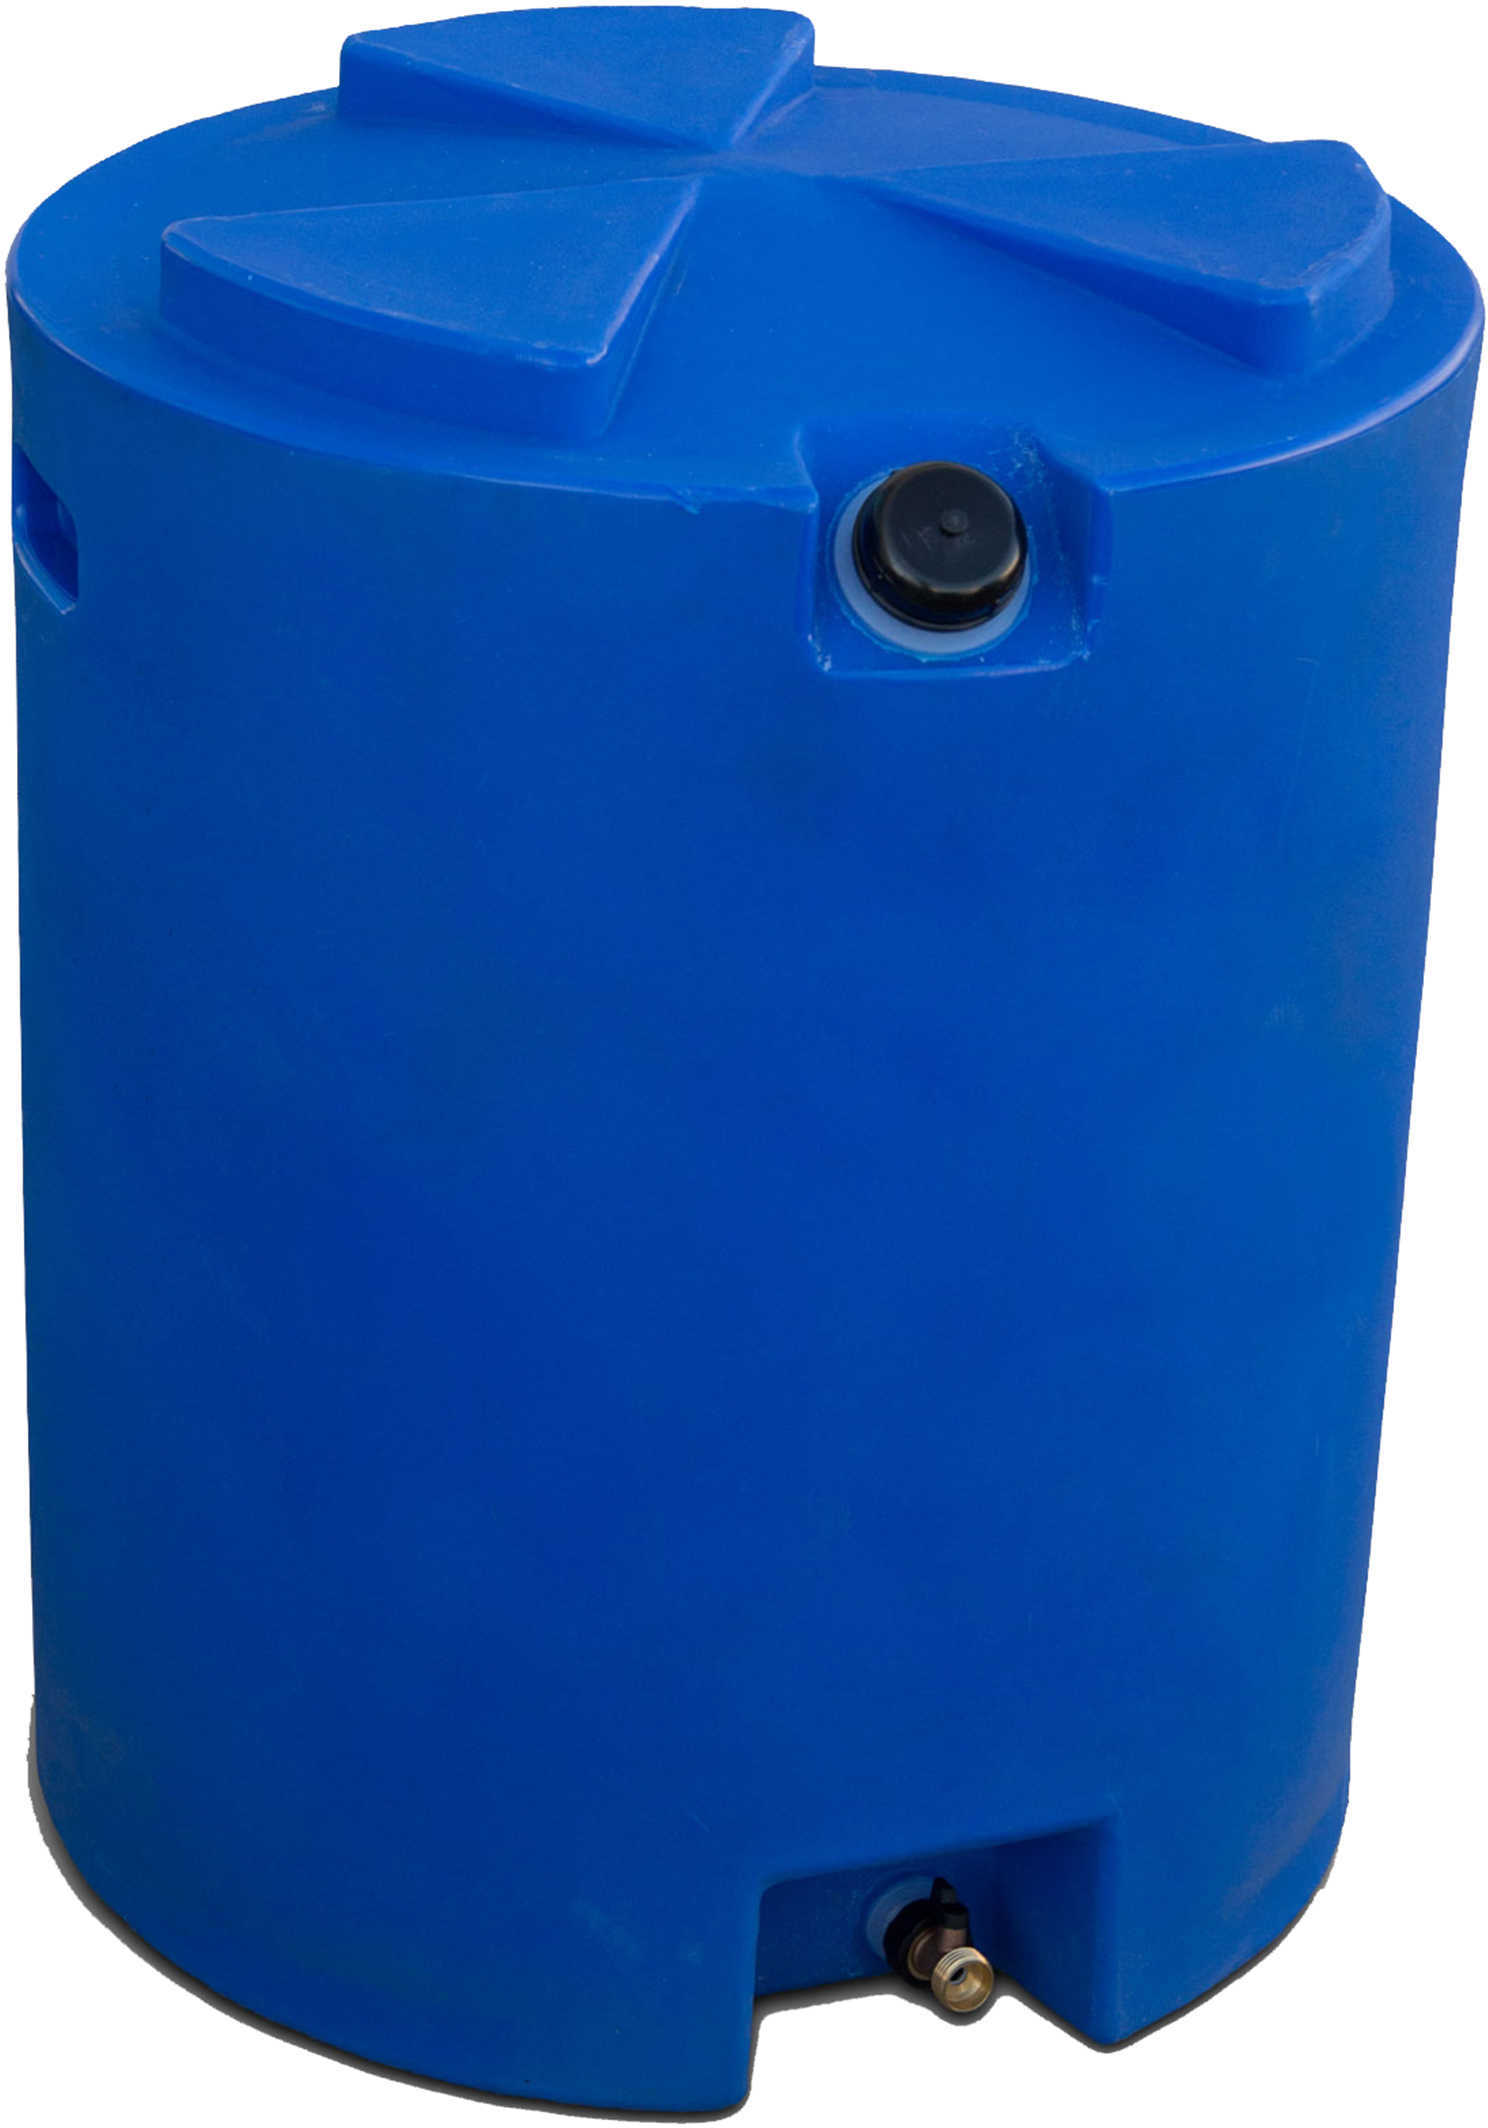 Water Storage Tank, 50 Gallons, Blue Md: 08-201